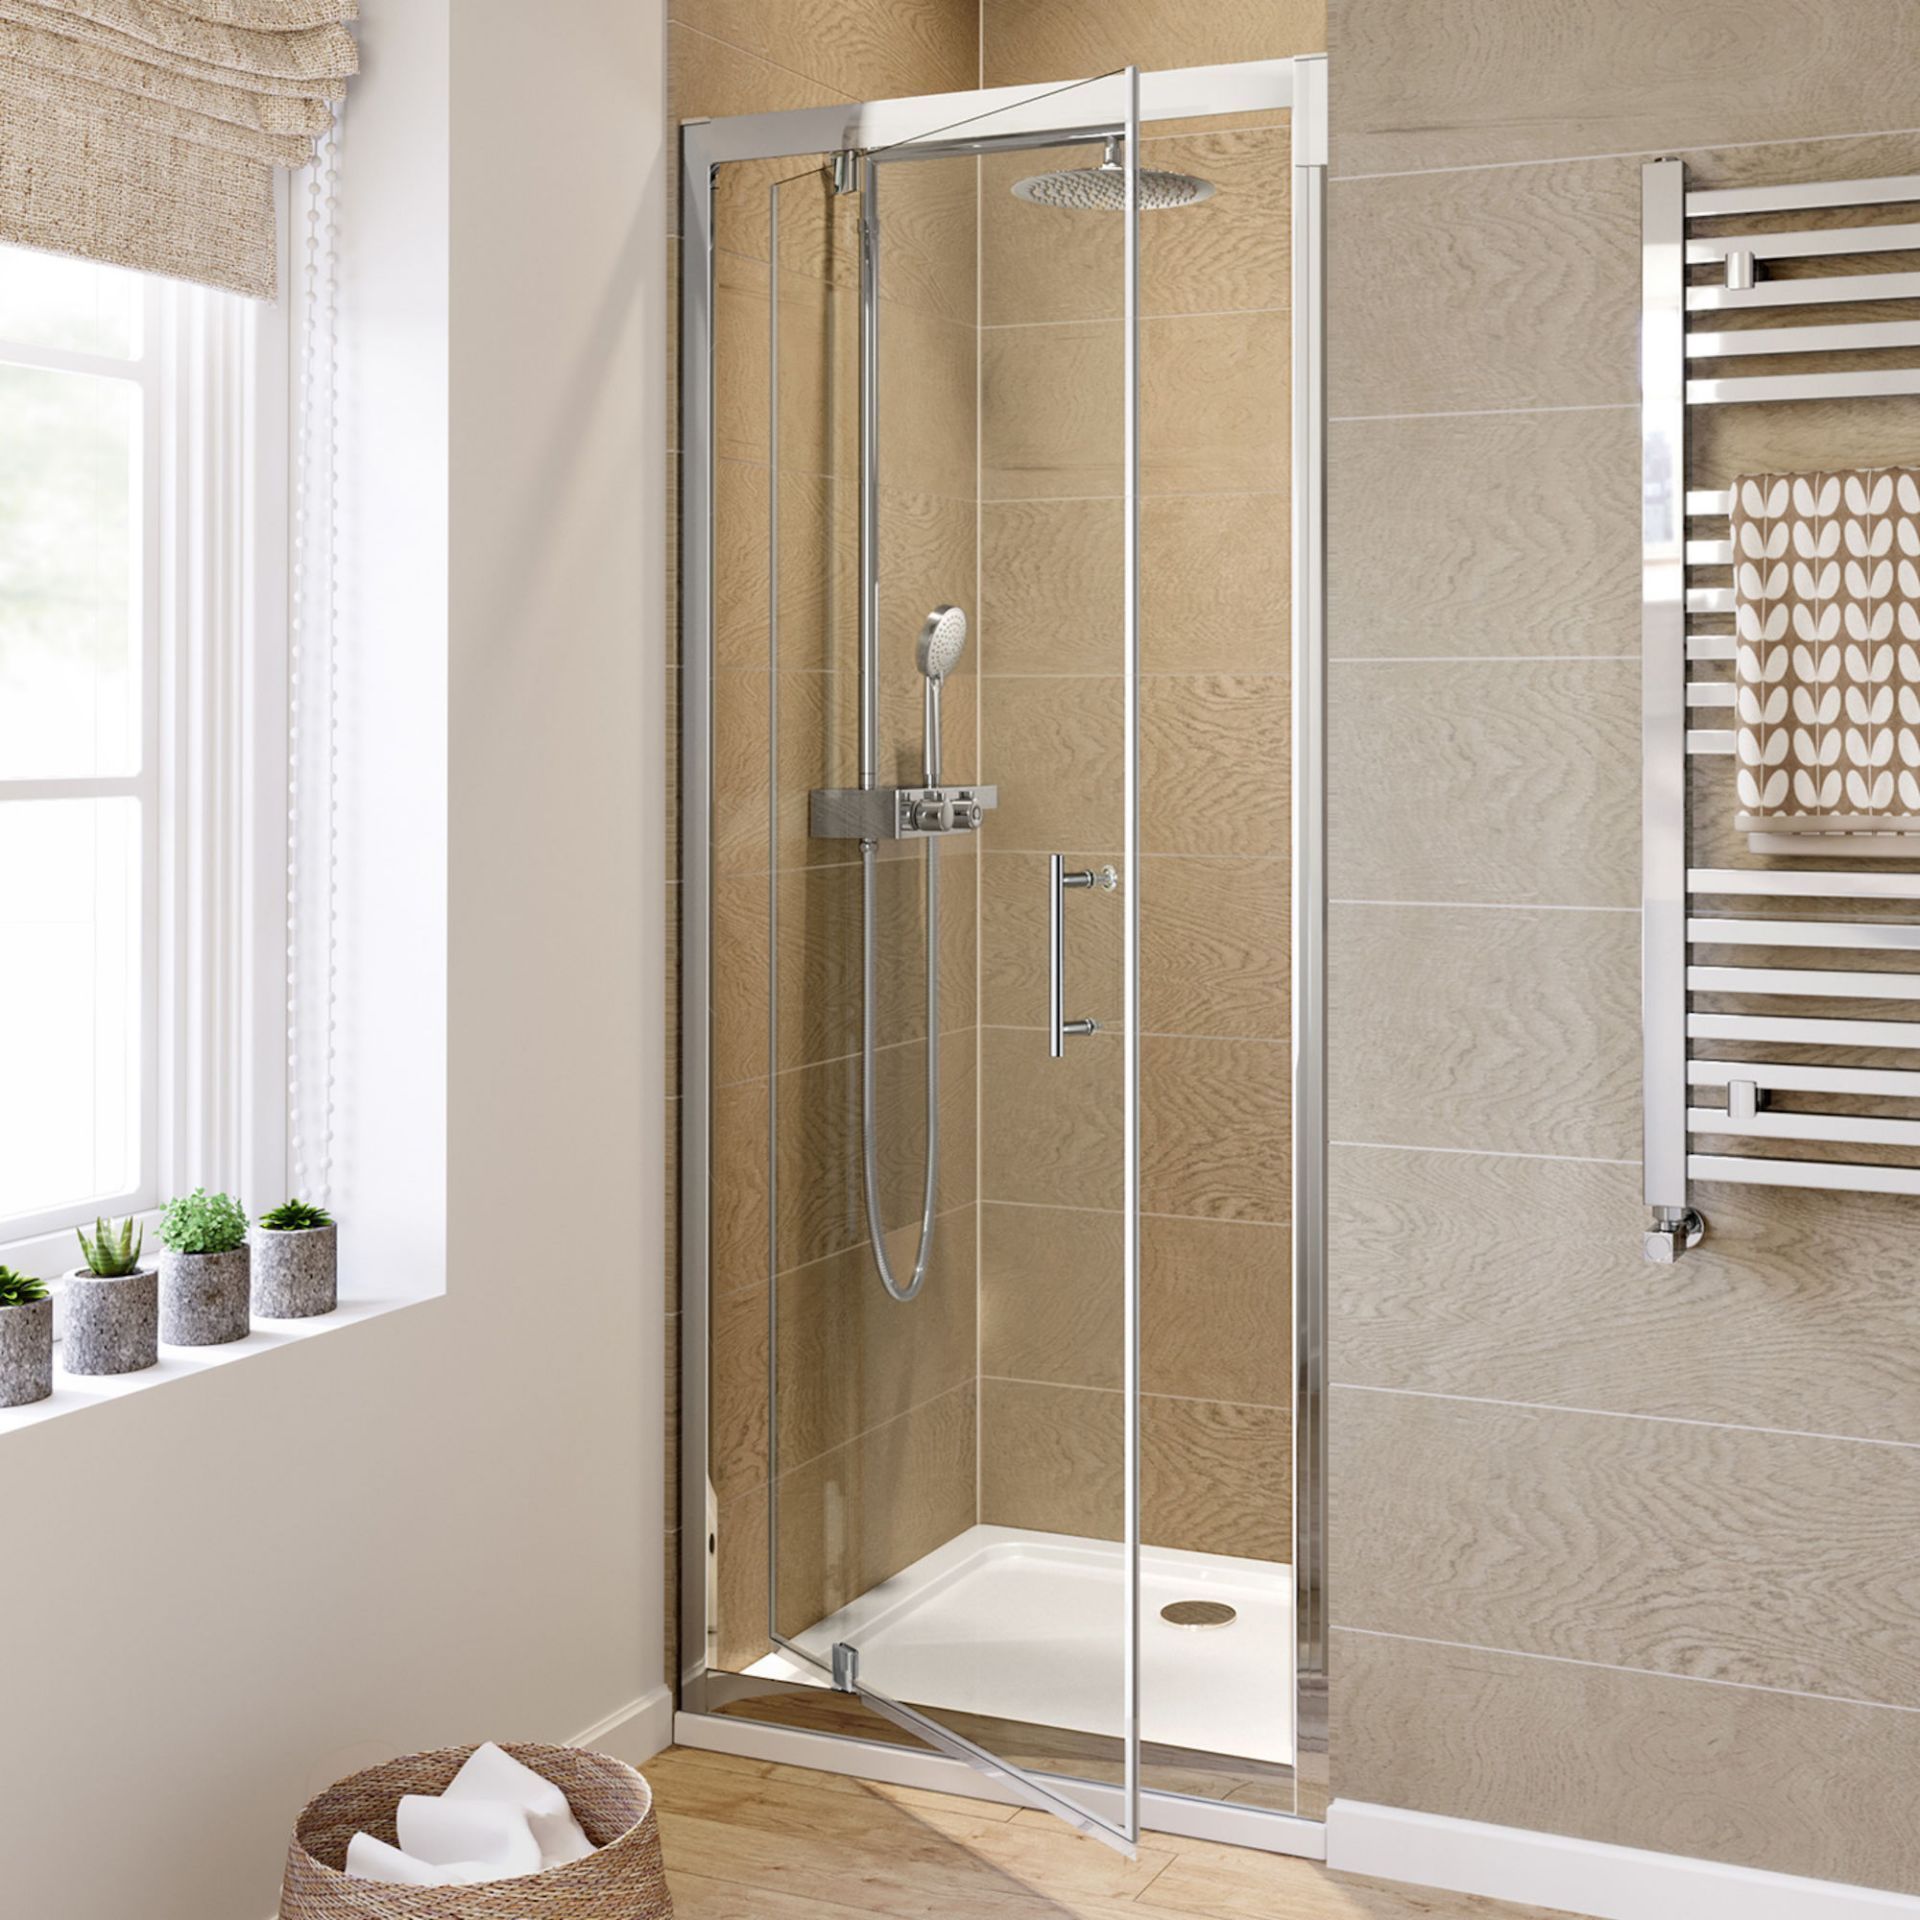 New Twyford's 700mm - 6mm - Premium Pivot Shower Door. RRP £299.99.8mm Safety Glass Fully Wat...